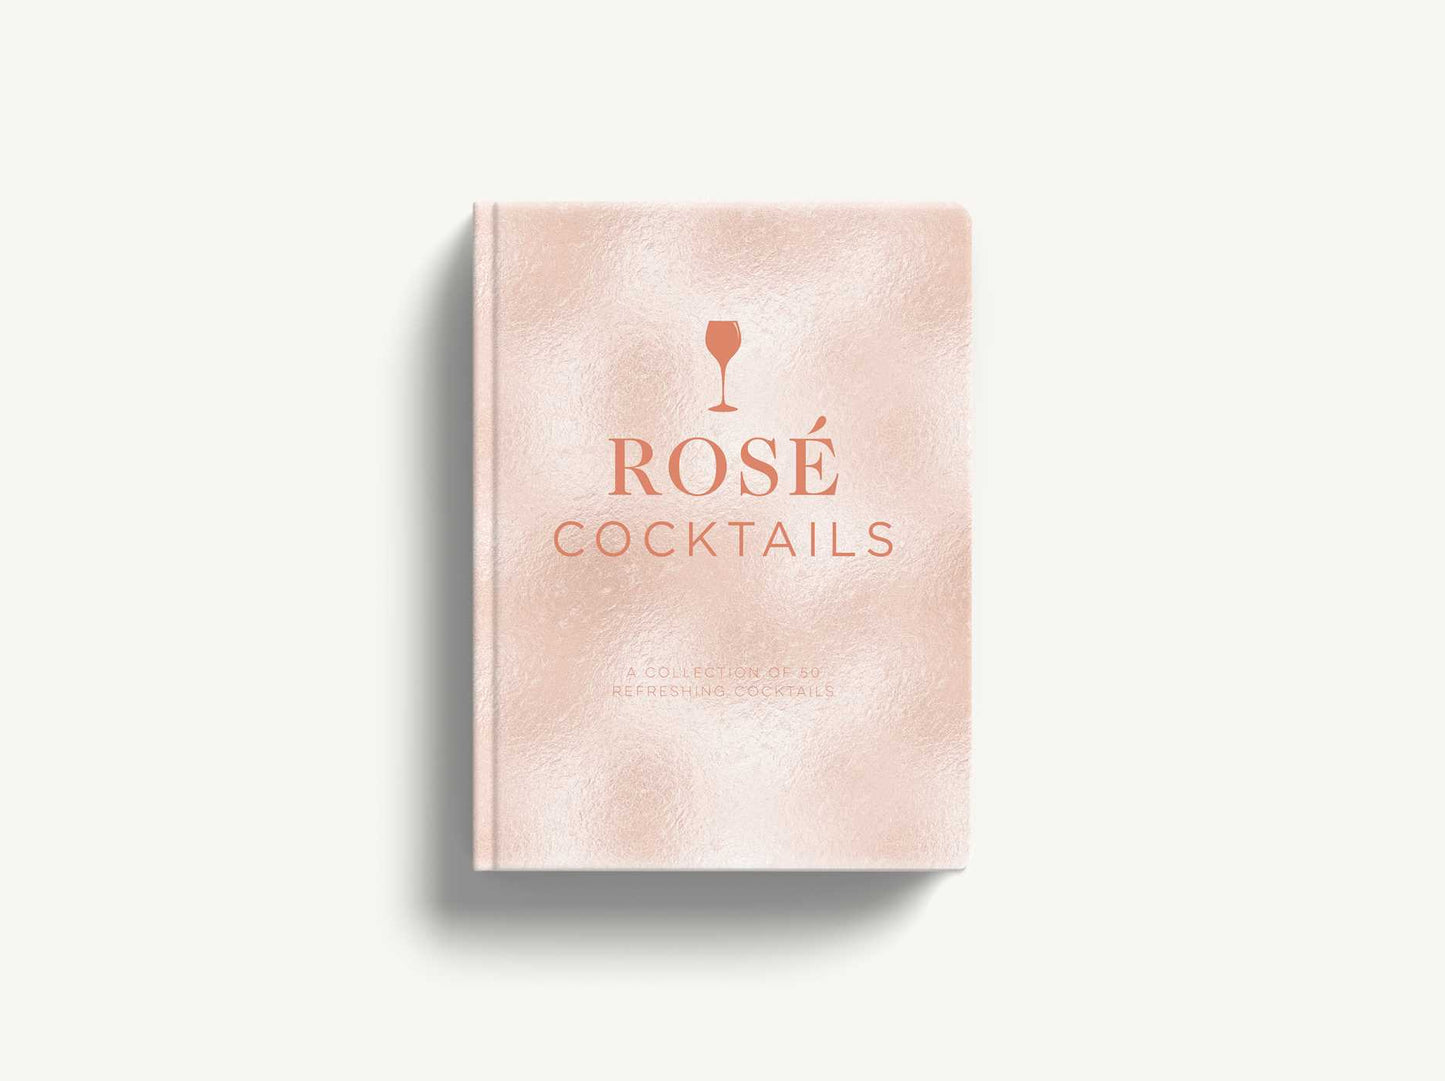 Rosé Cocktails: A Collection of Classic and Modern Ros? Cocktails